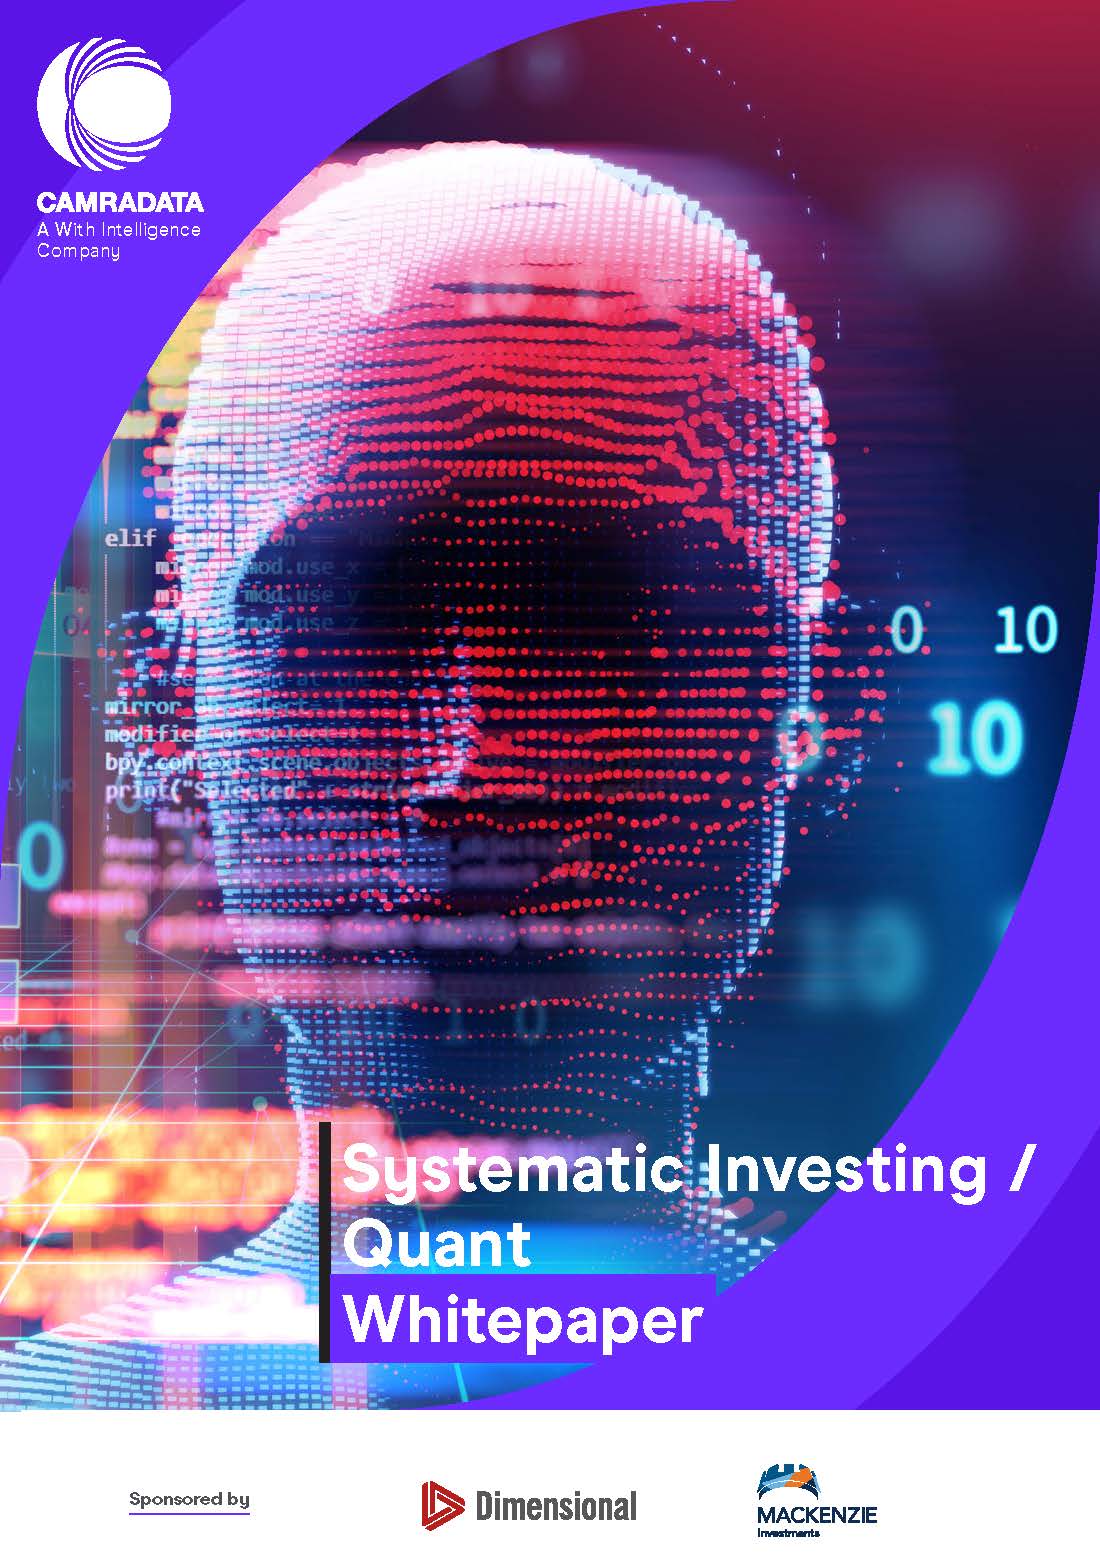 Systematic Investing / Quant Whitepaper